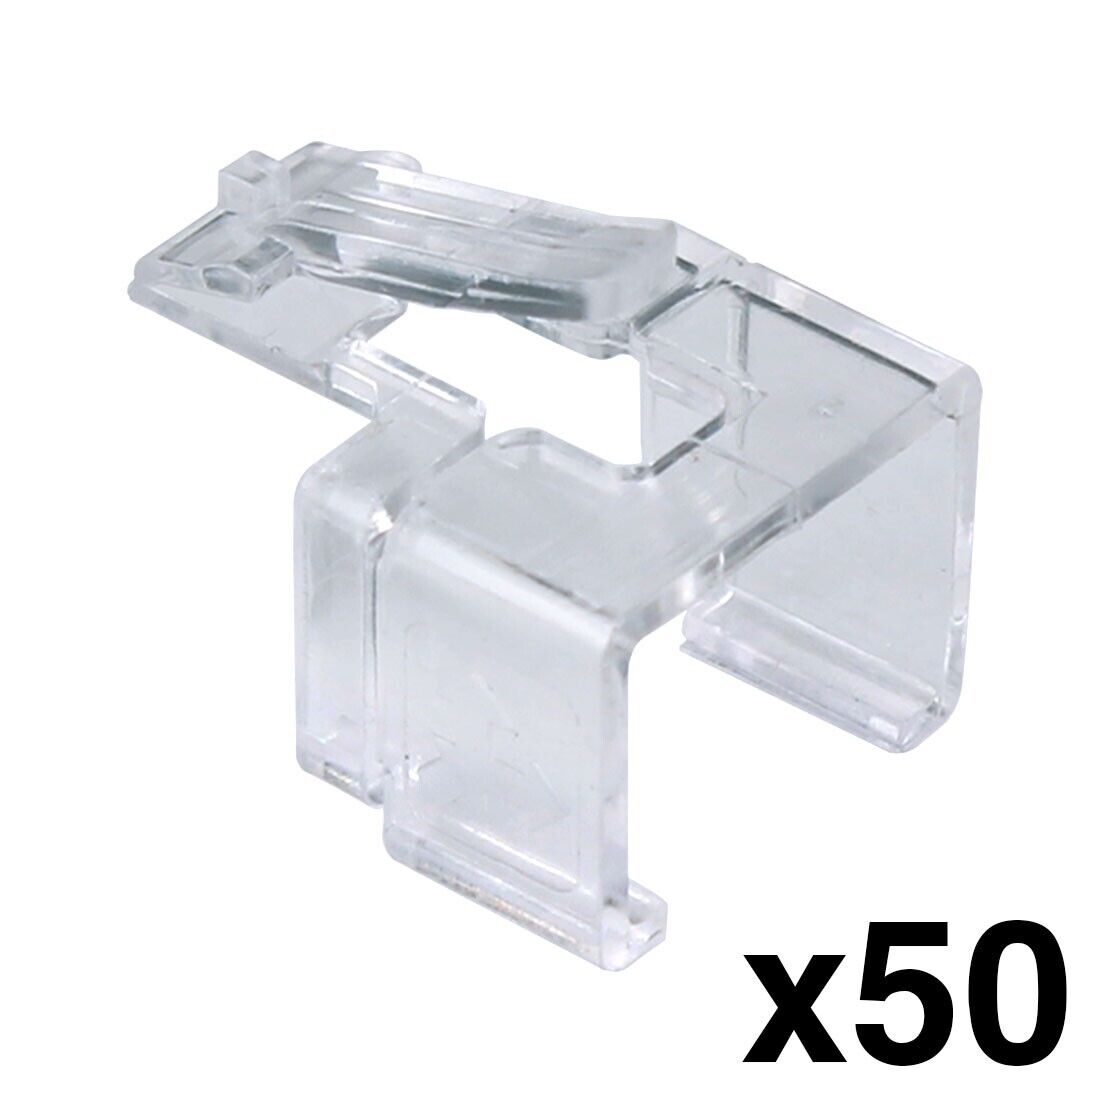 Construct Pro RJ-45 Easy Plug Repair for Cat5e & Cat6 (Bag of 50, Clear)